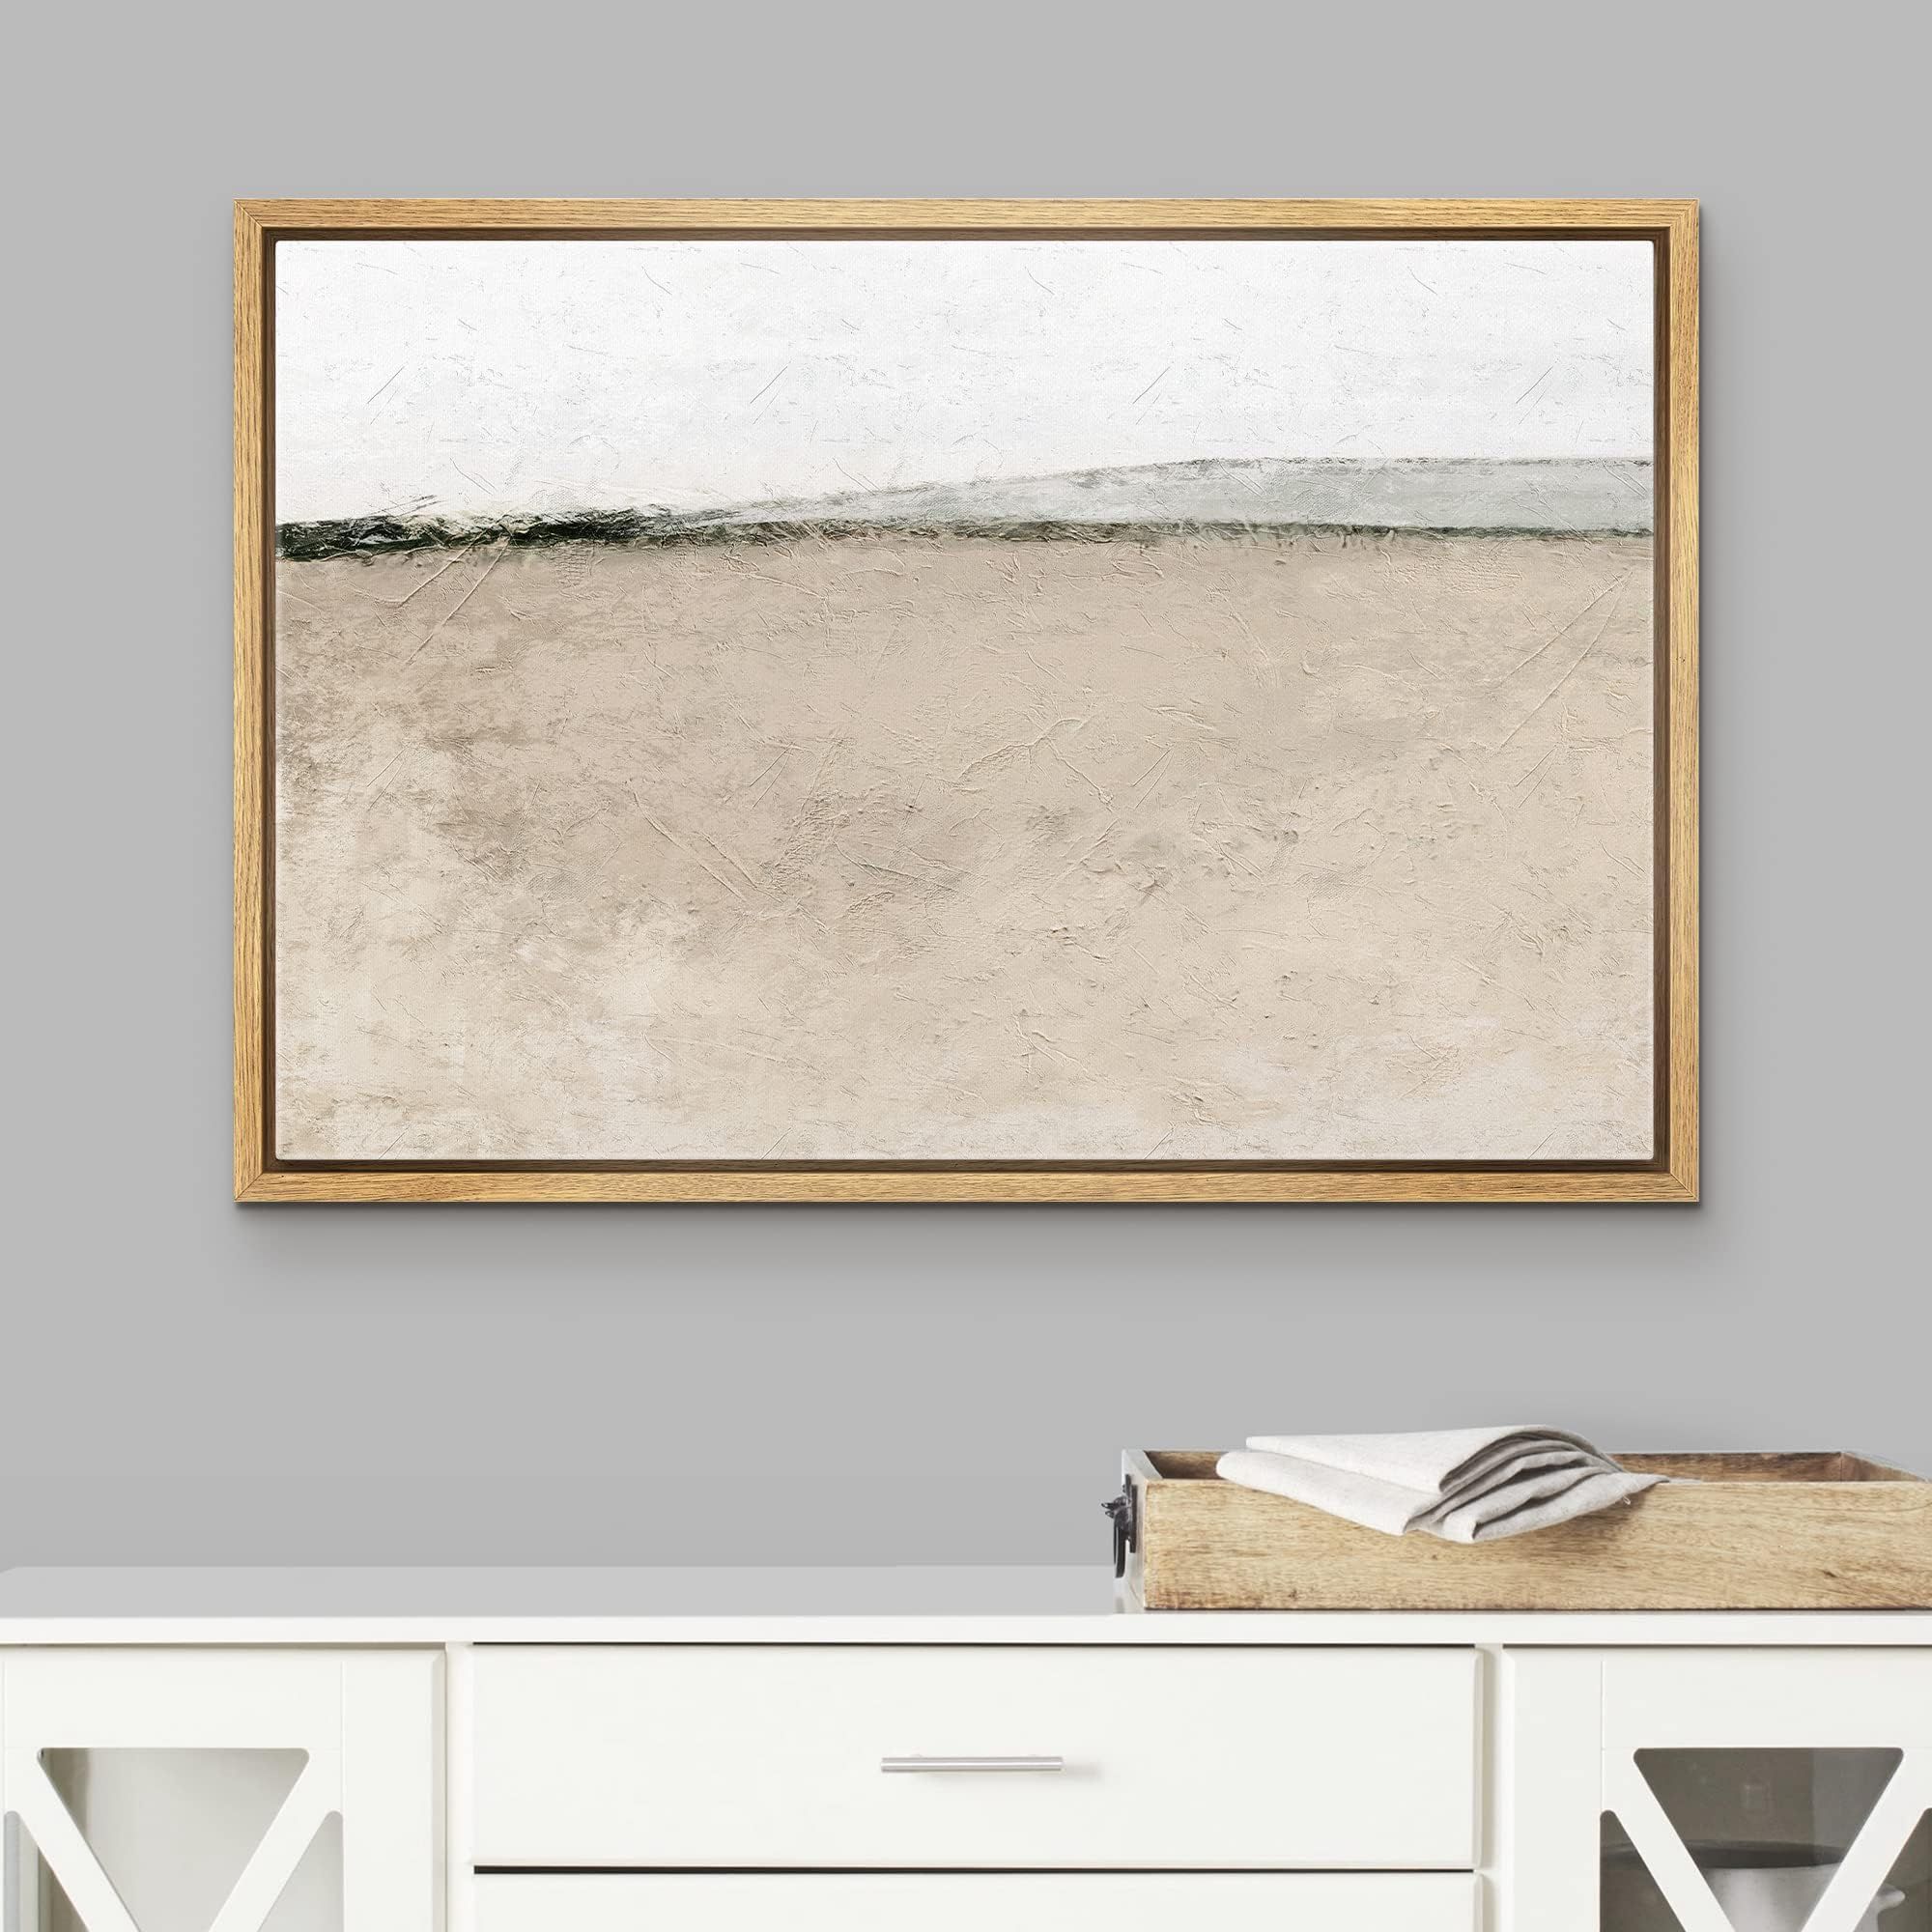 wall26 Framed Canvas Print Wall Art Desolate Brown Watercolor Rural Landscape Abstract Shapes Illust | Amazon (US)